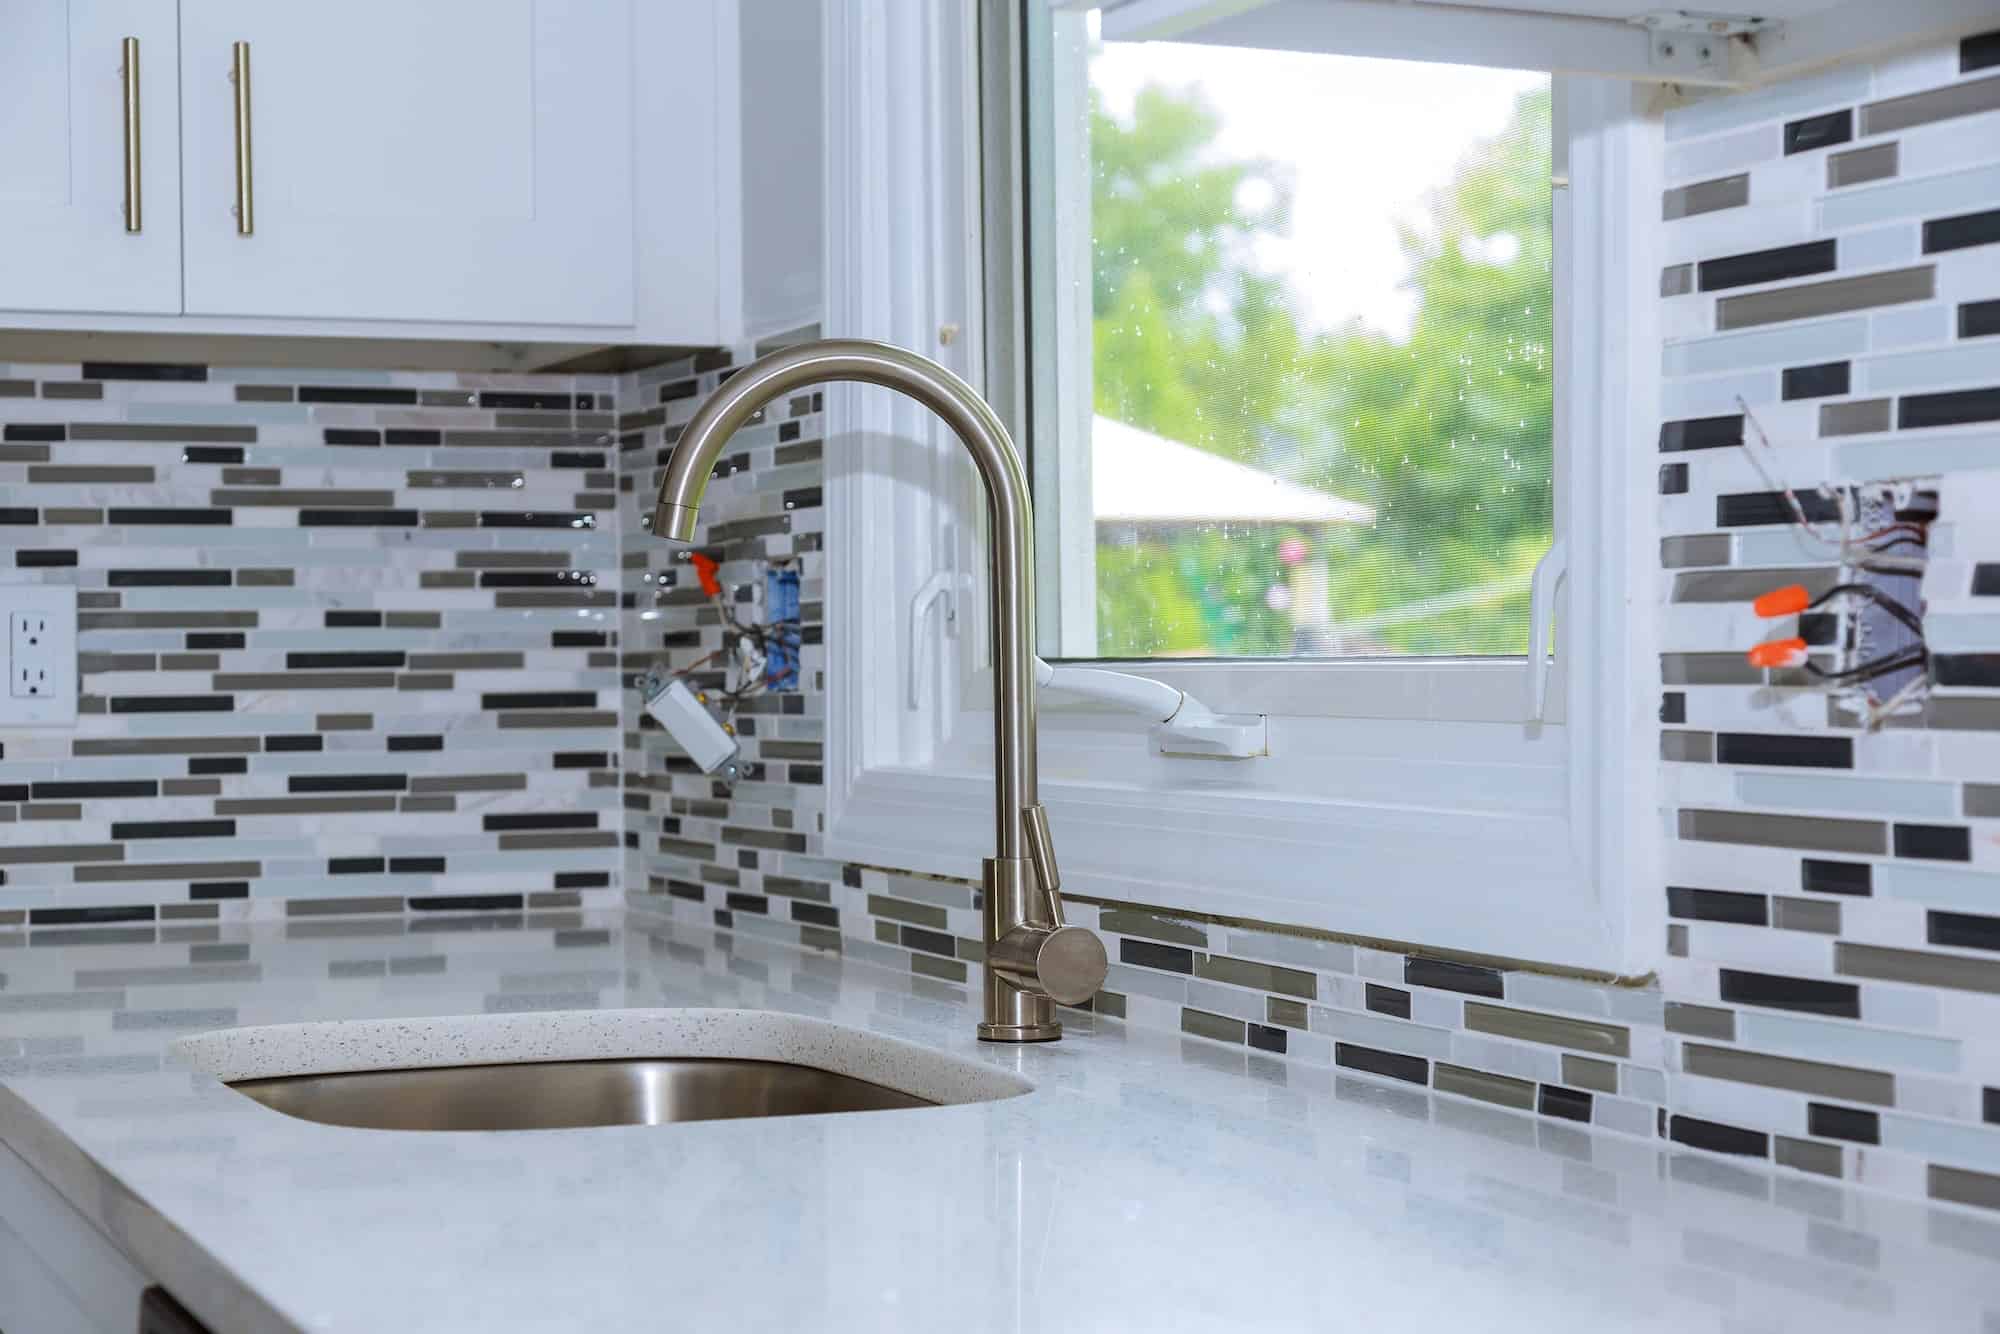 Faucet and kitchen faucet and countertop detail sink with brick wall